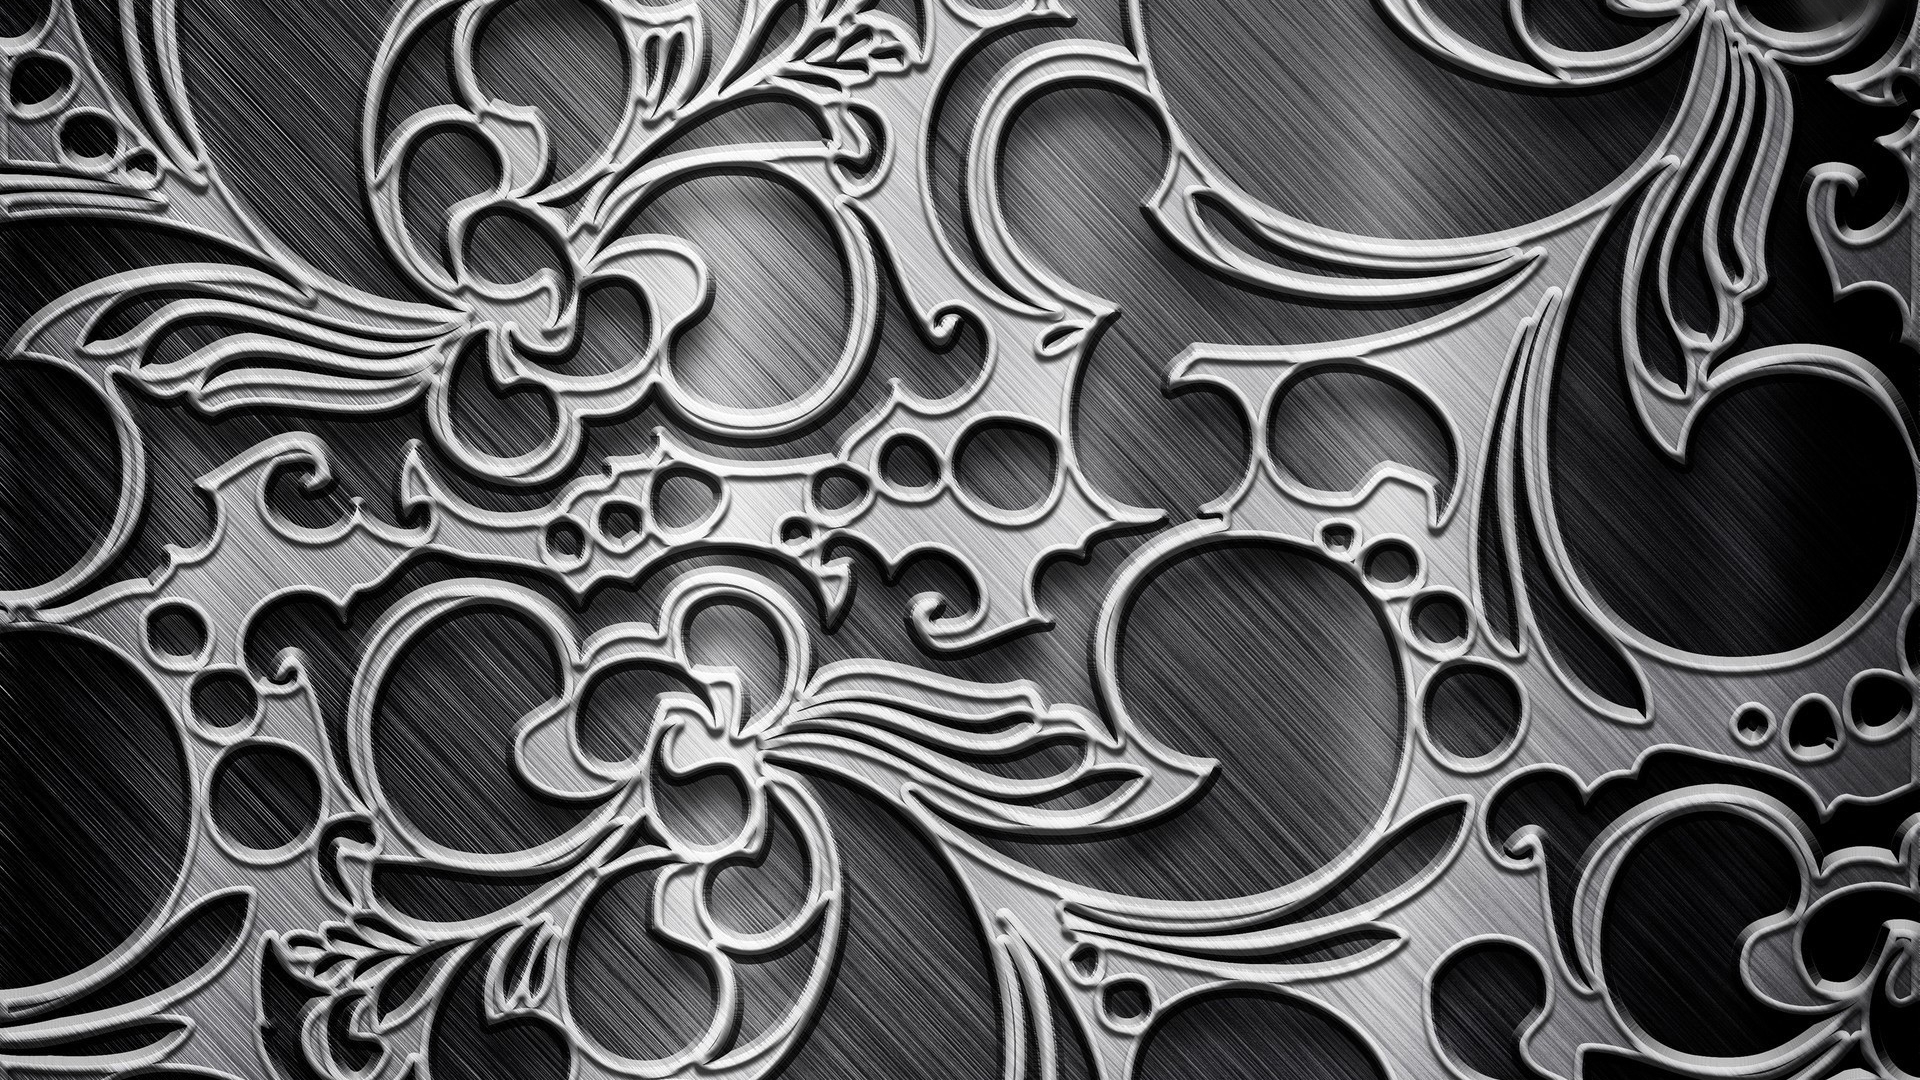 wallpapers metal,pattern,monochrome,black and white,ornament,floral design